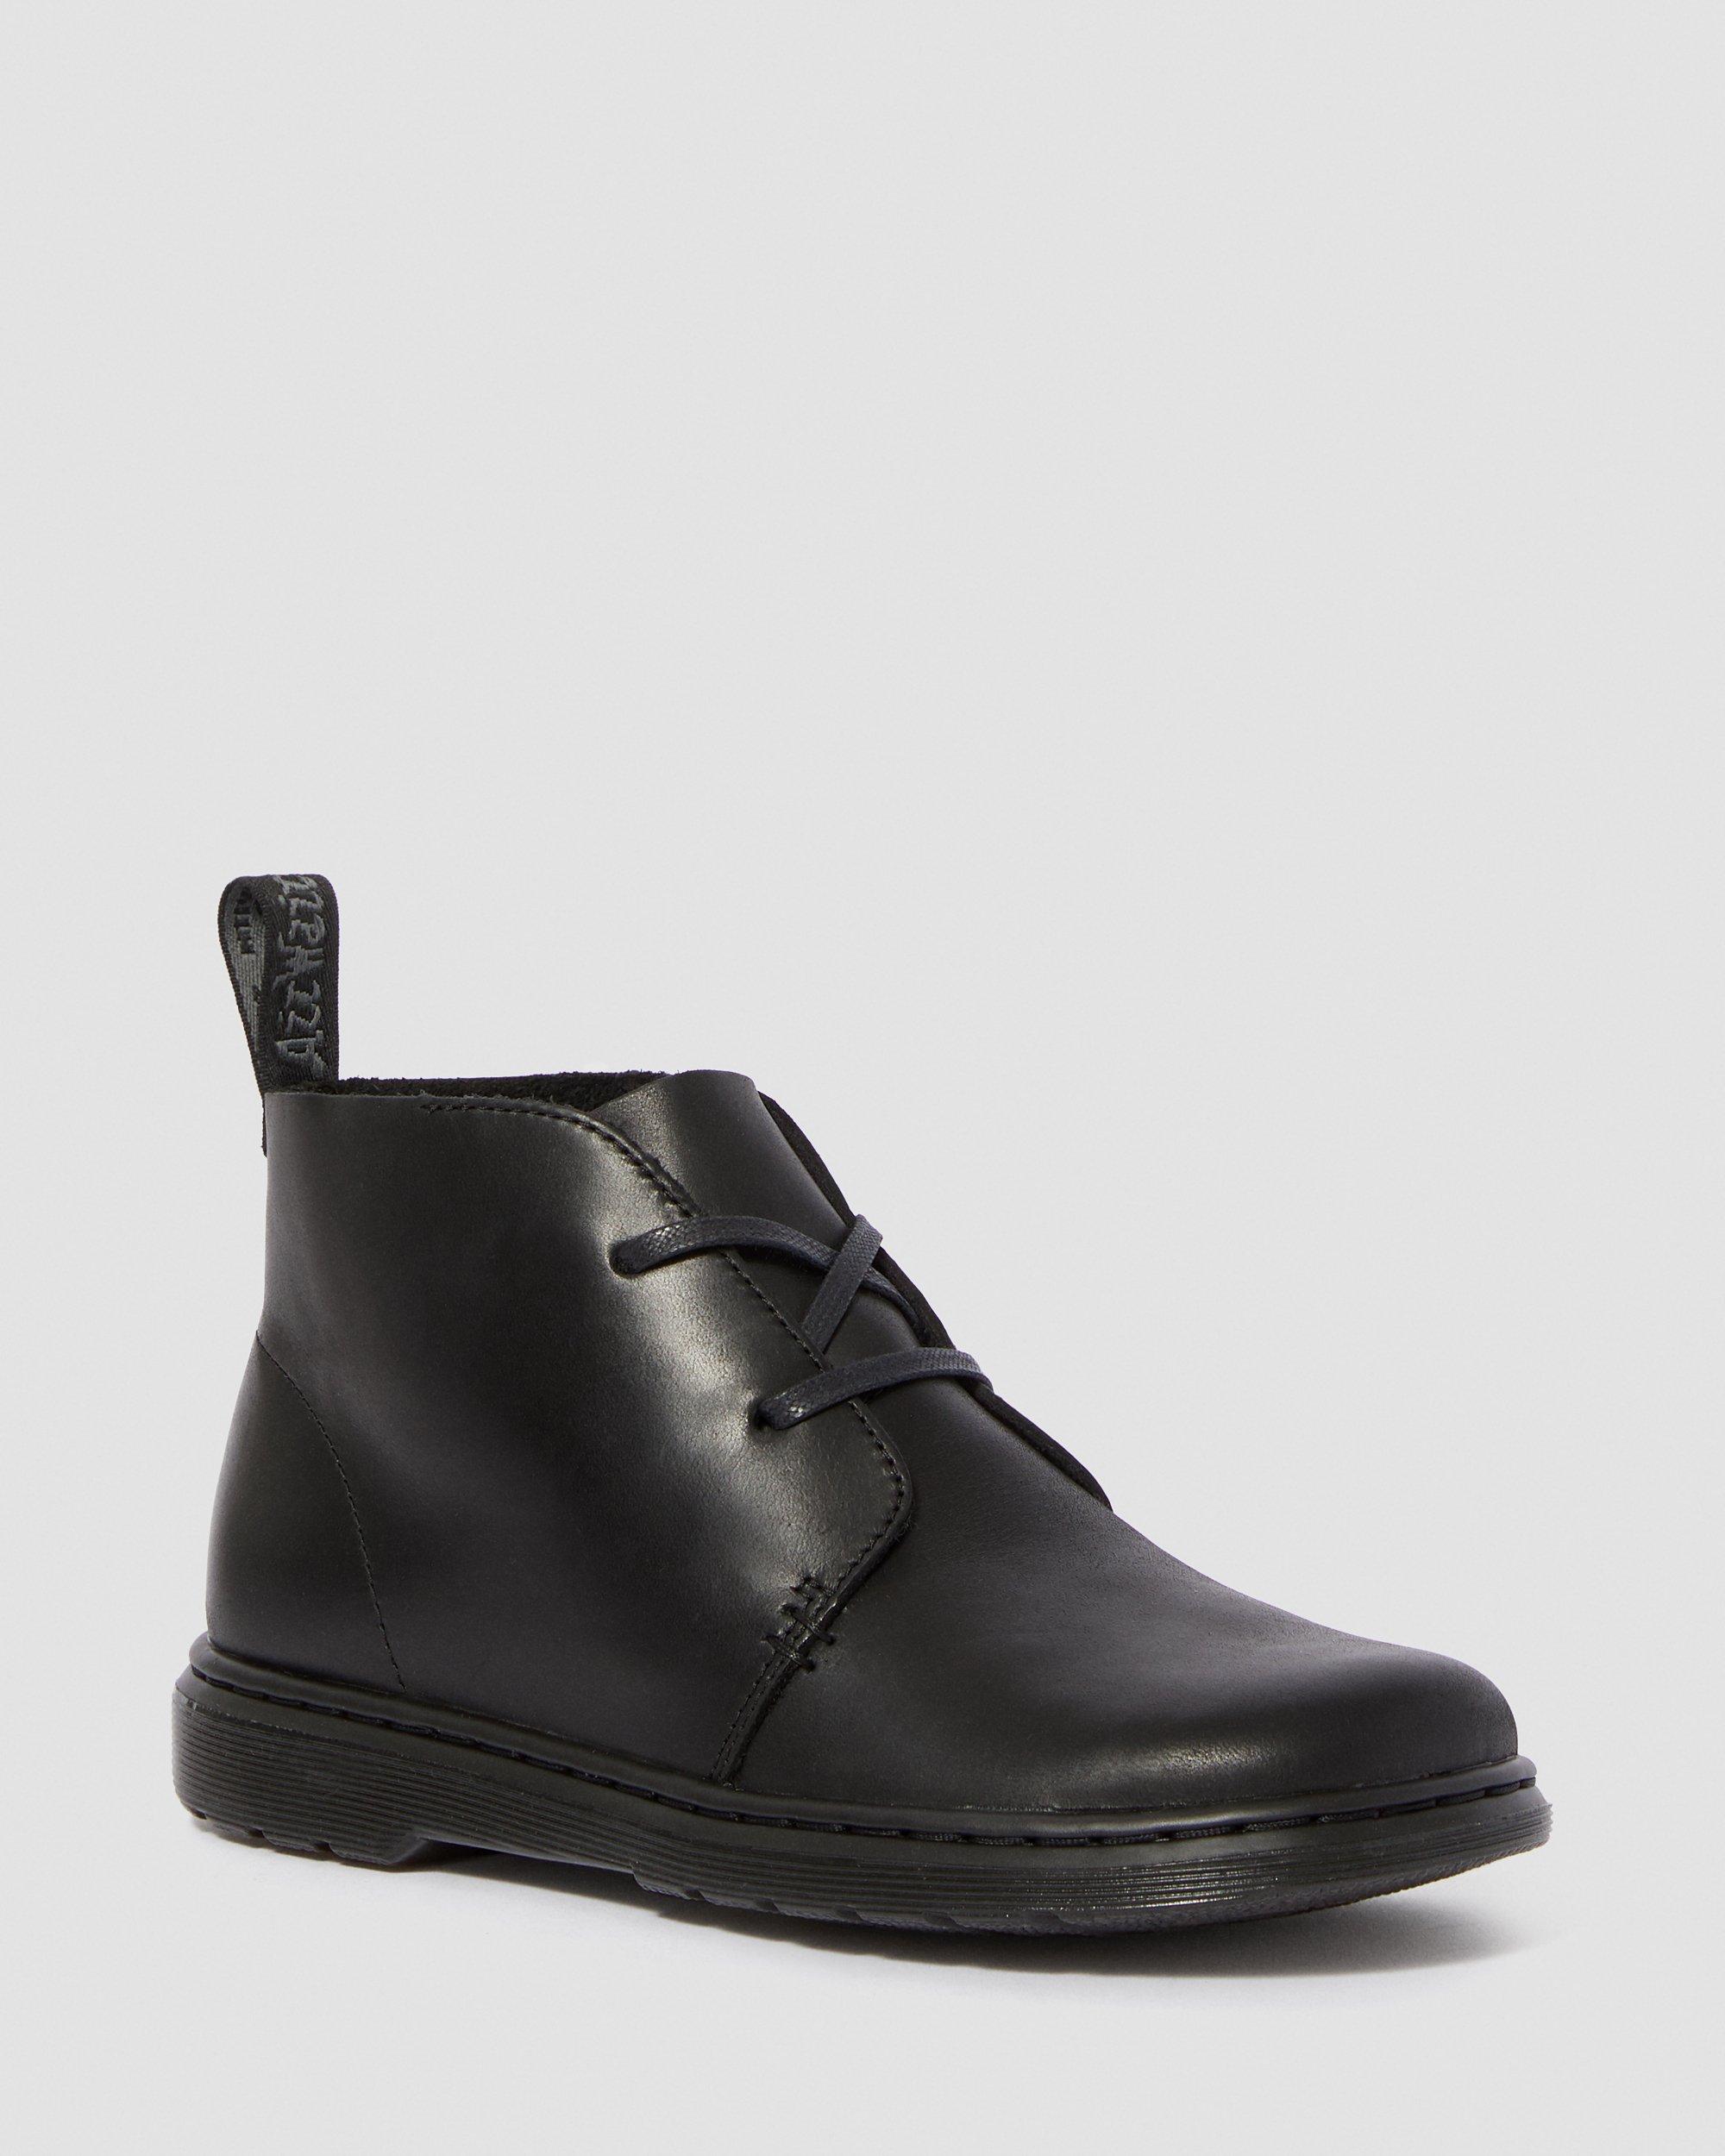 CYNTHIA LEATHER CHUKKA BOOTS Dr. Martens